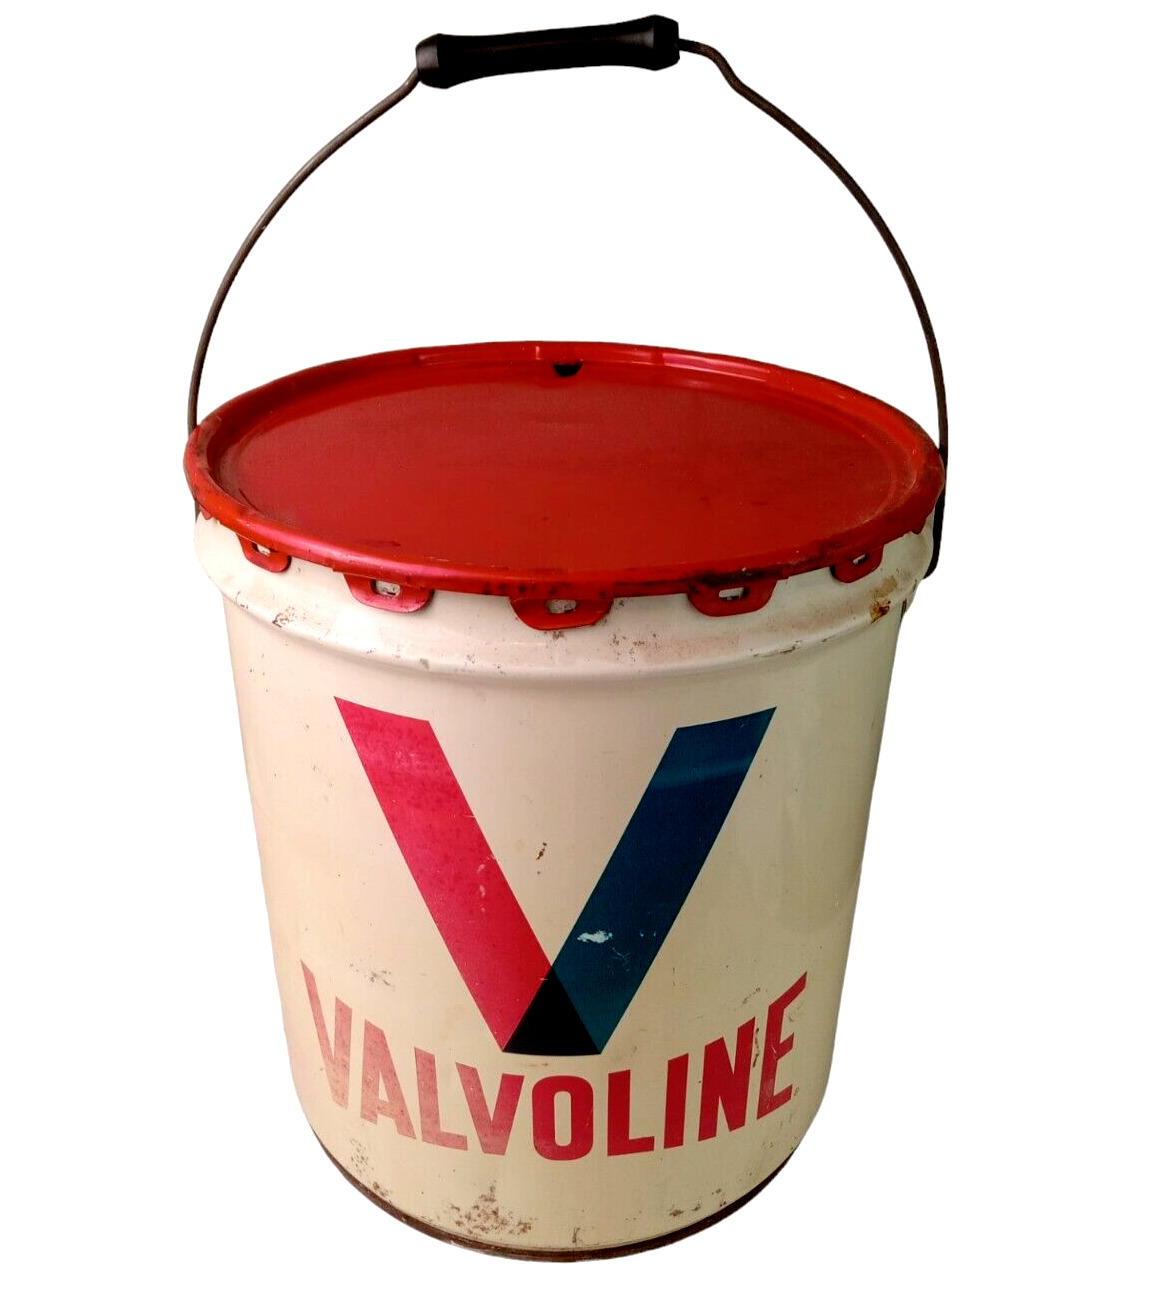 Vintage VALVOLINE 35 Lb. Oil Grease Metal Can Tin 5 Gallon Bucket Pail Red Lid